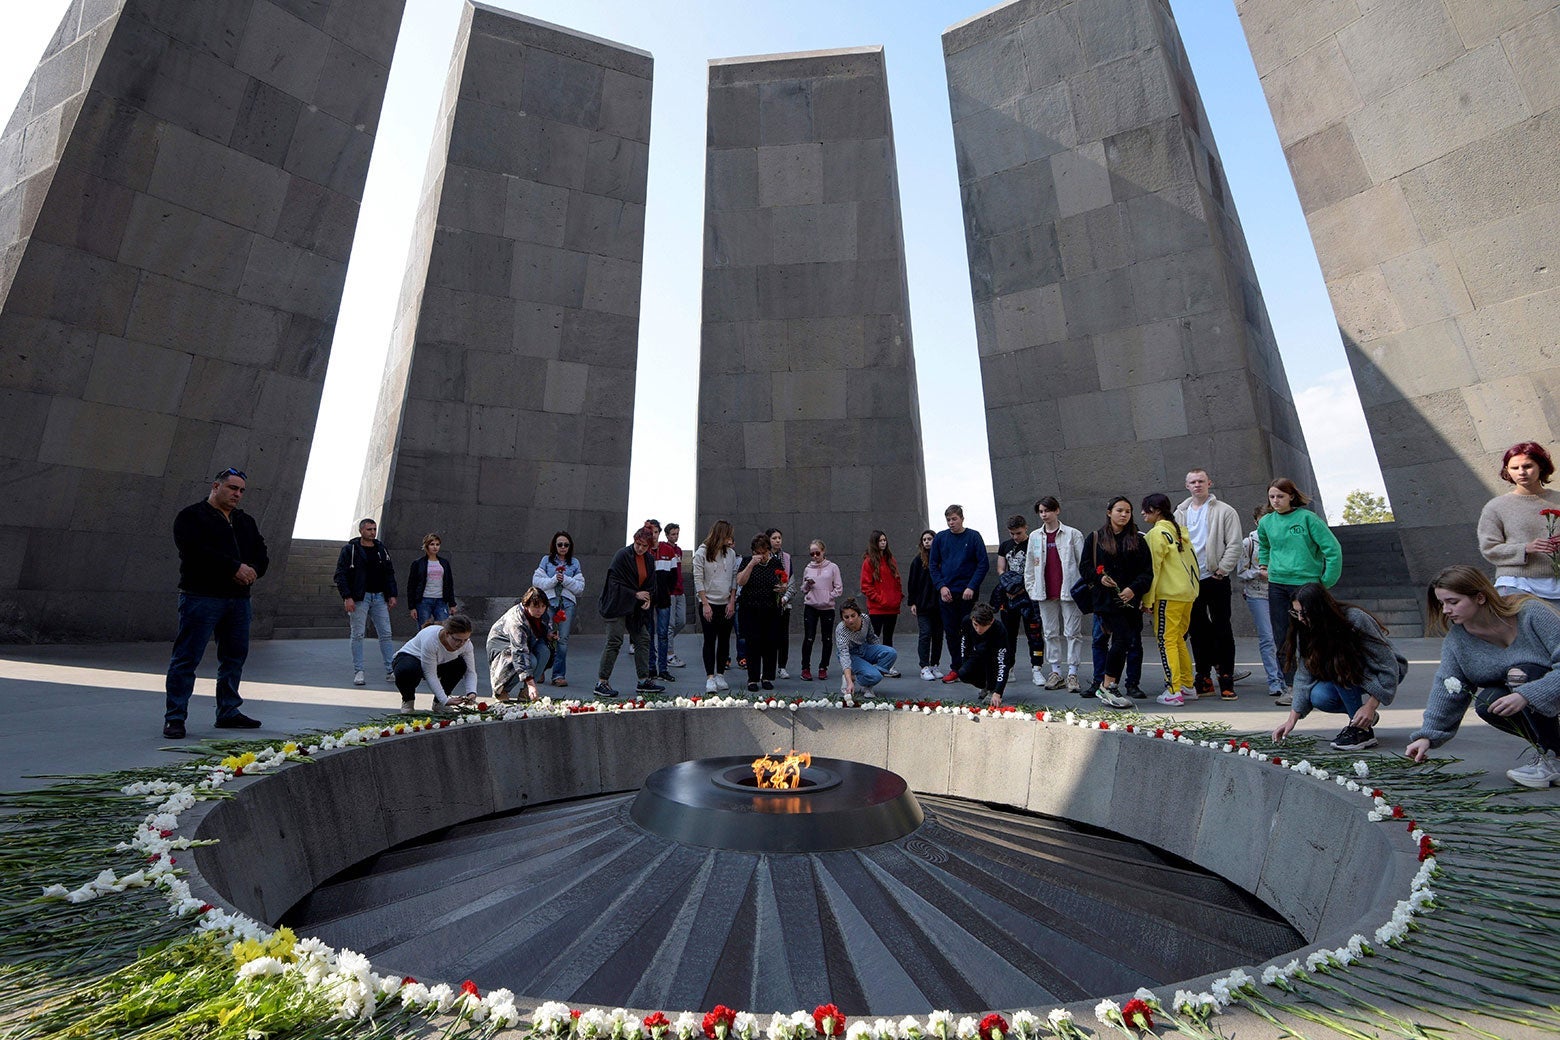 Armenians gathered around a commemorative flame, with tall stone slabs in the background.